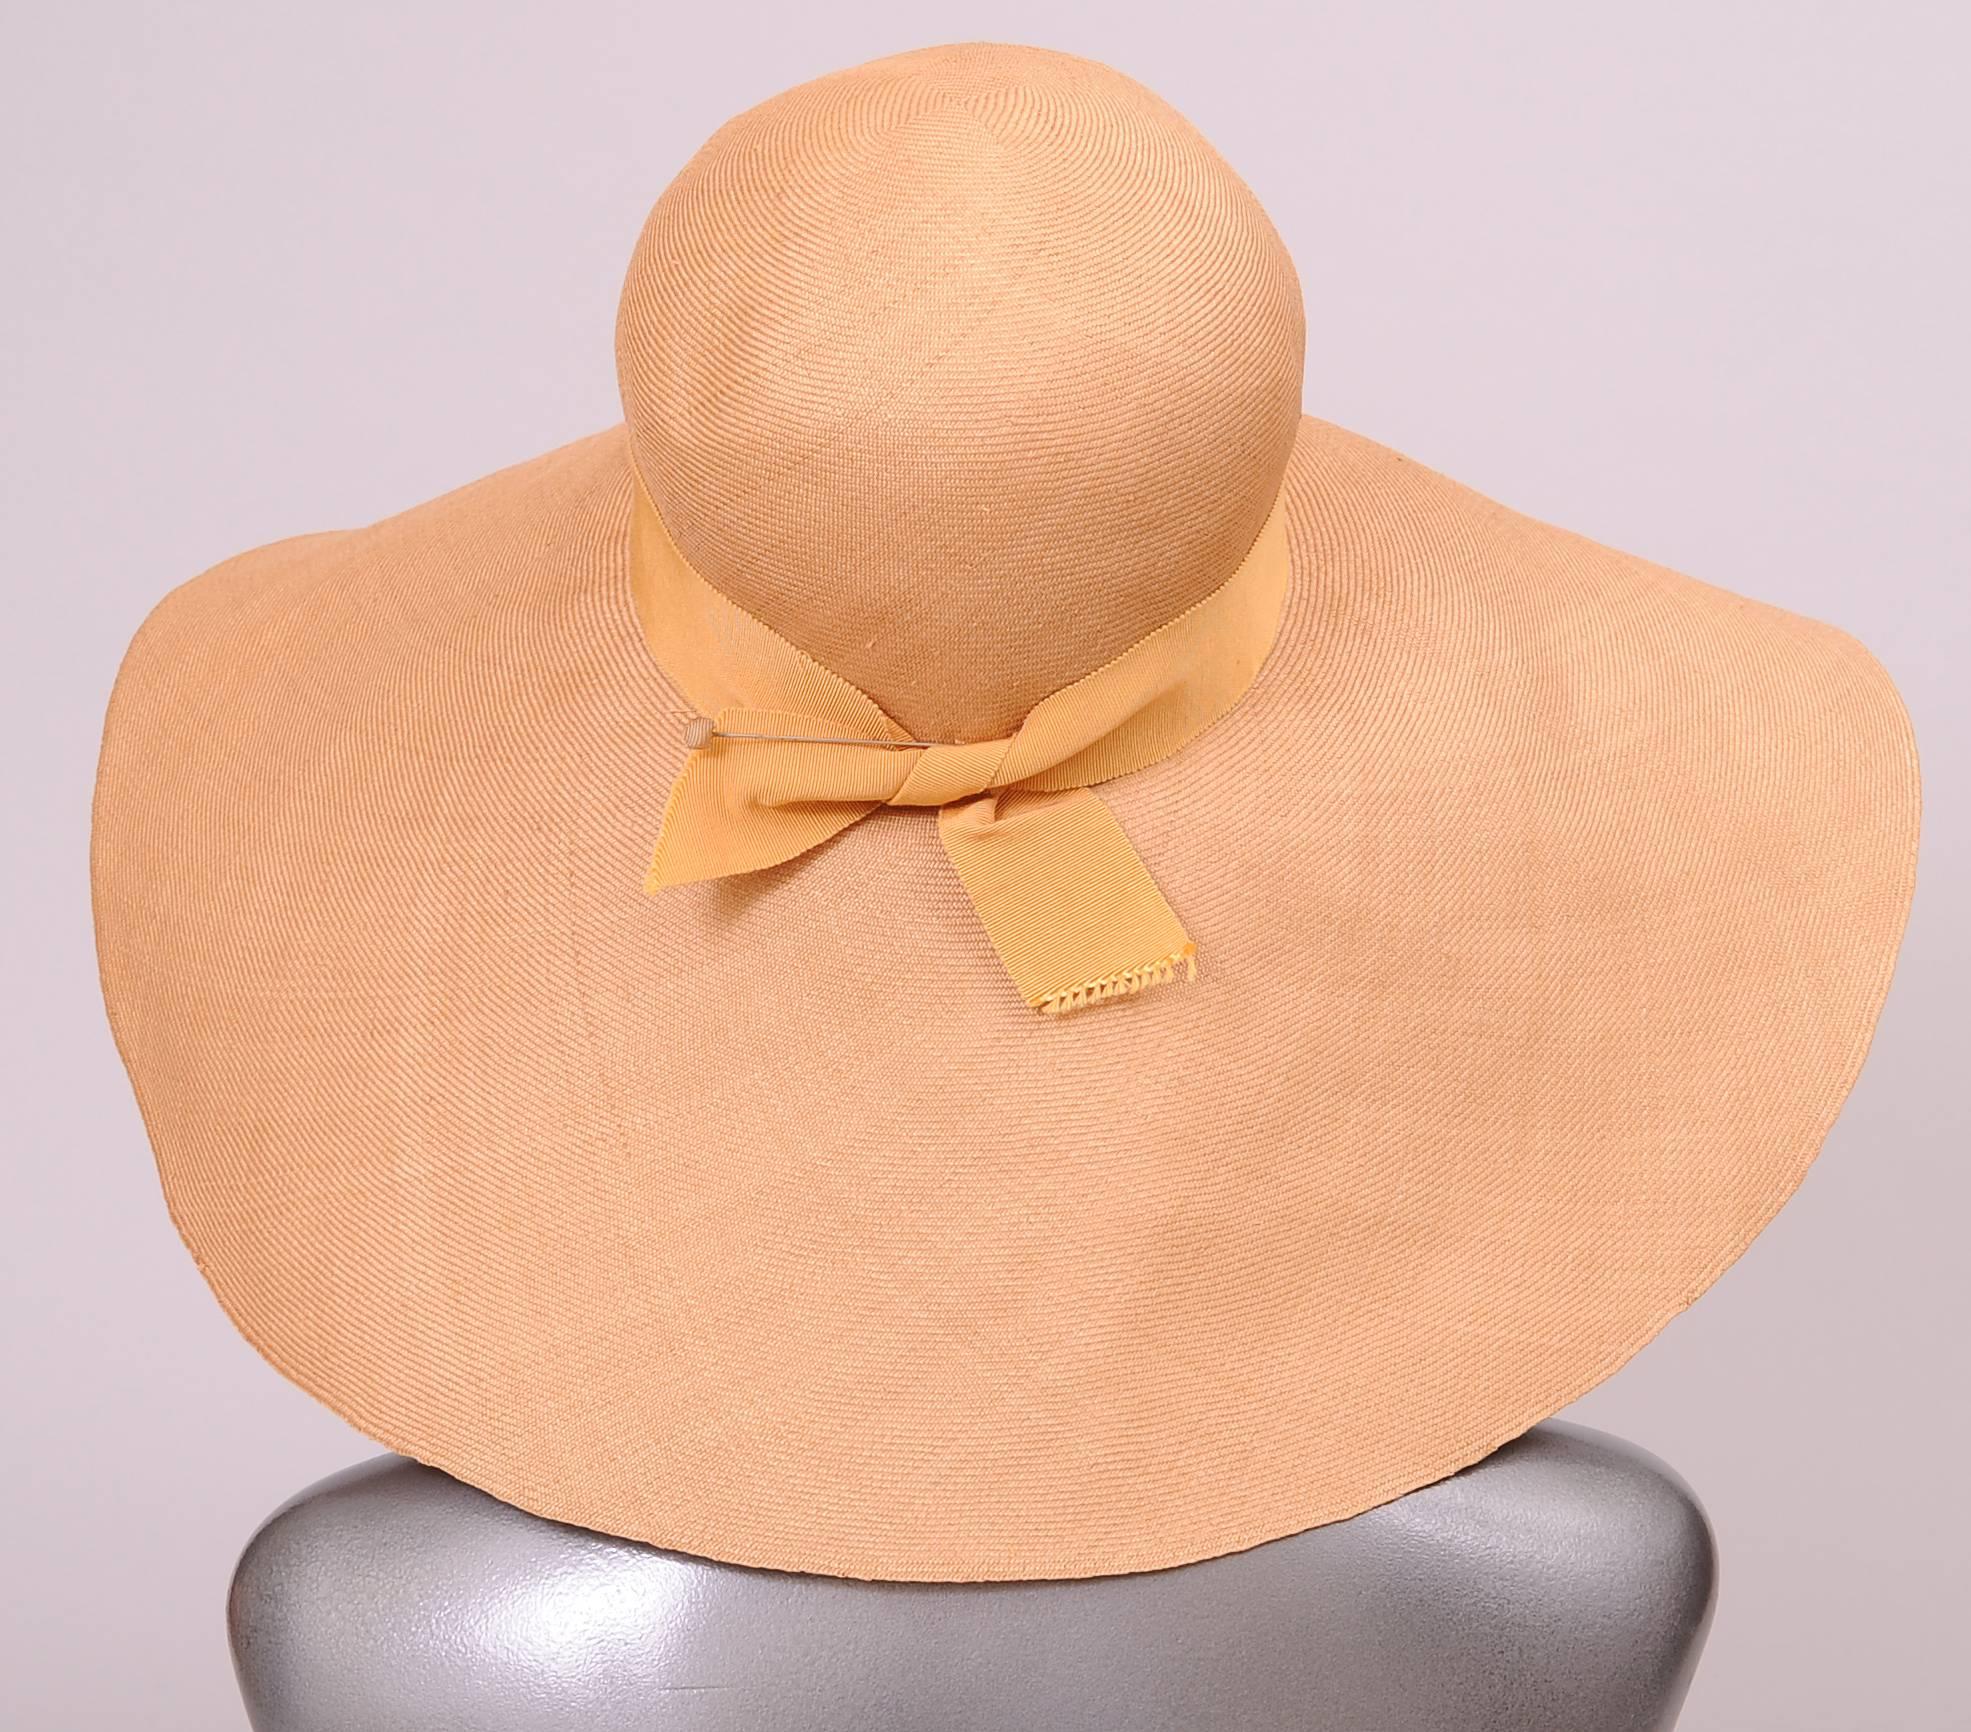 A broad floppy brim adds glamour and mystery to the wearrer of this finely woven natural straw hat designed by Adolfo. The crown is trimmed with a matching gros grain ribbon hat band. This hat is i excellent condition.
Measurements;
Interior